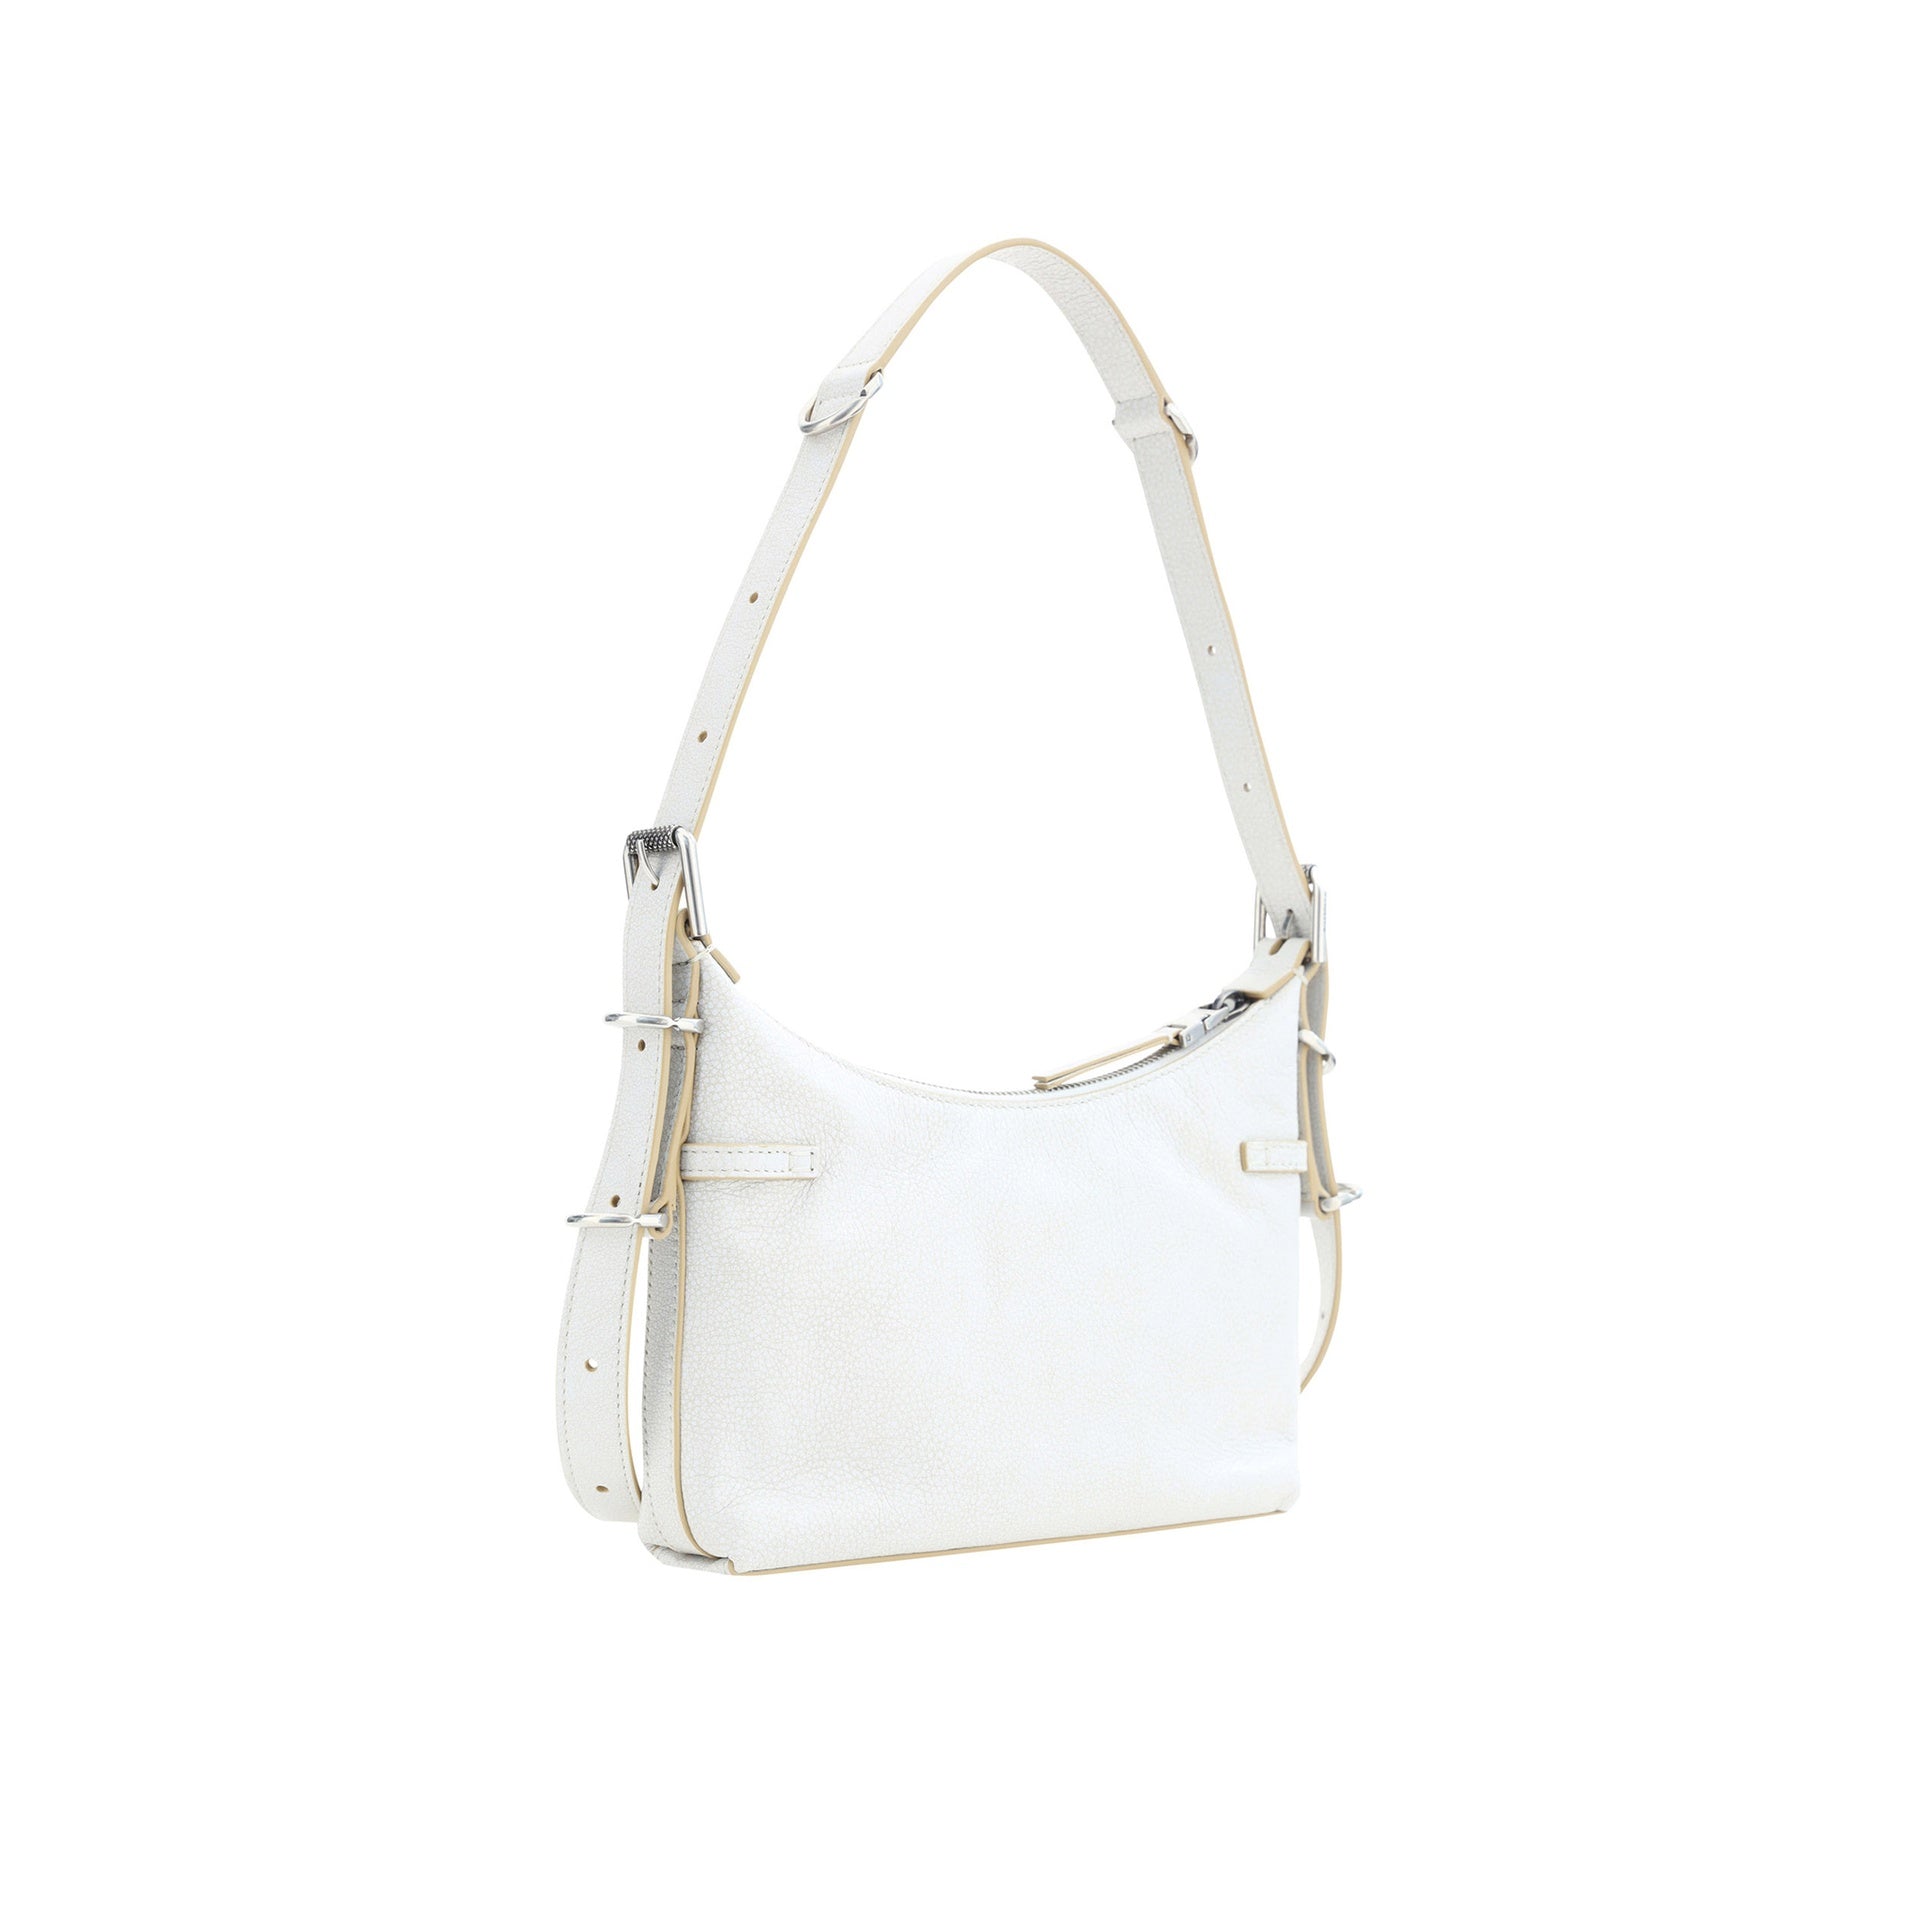 GIVENCHY-OUTLET-SALE-Versace-Voyou-Mini-Bag-Taschen-WHITE-UNI-ARCHIVE-COLLECTION-3.jpg